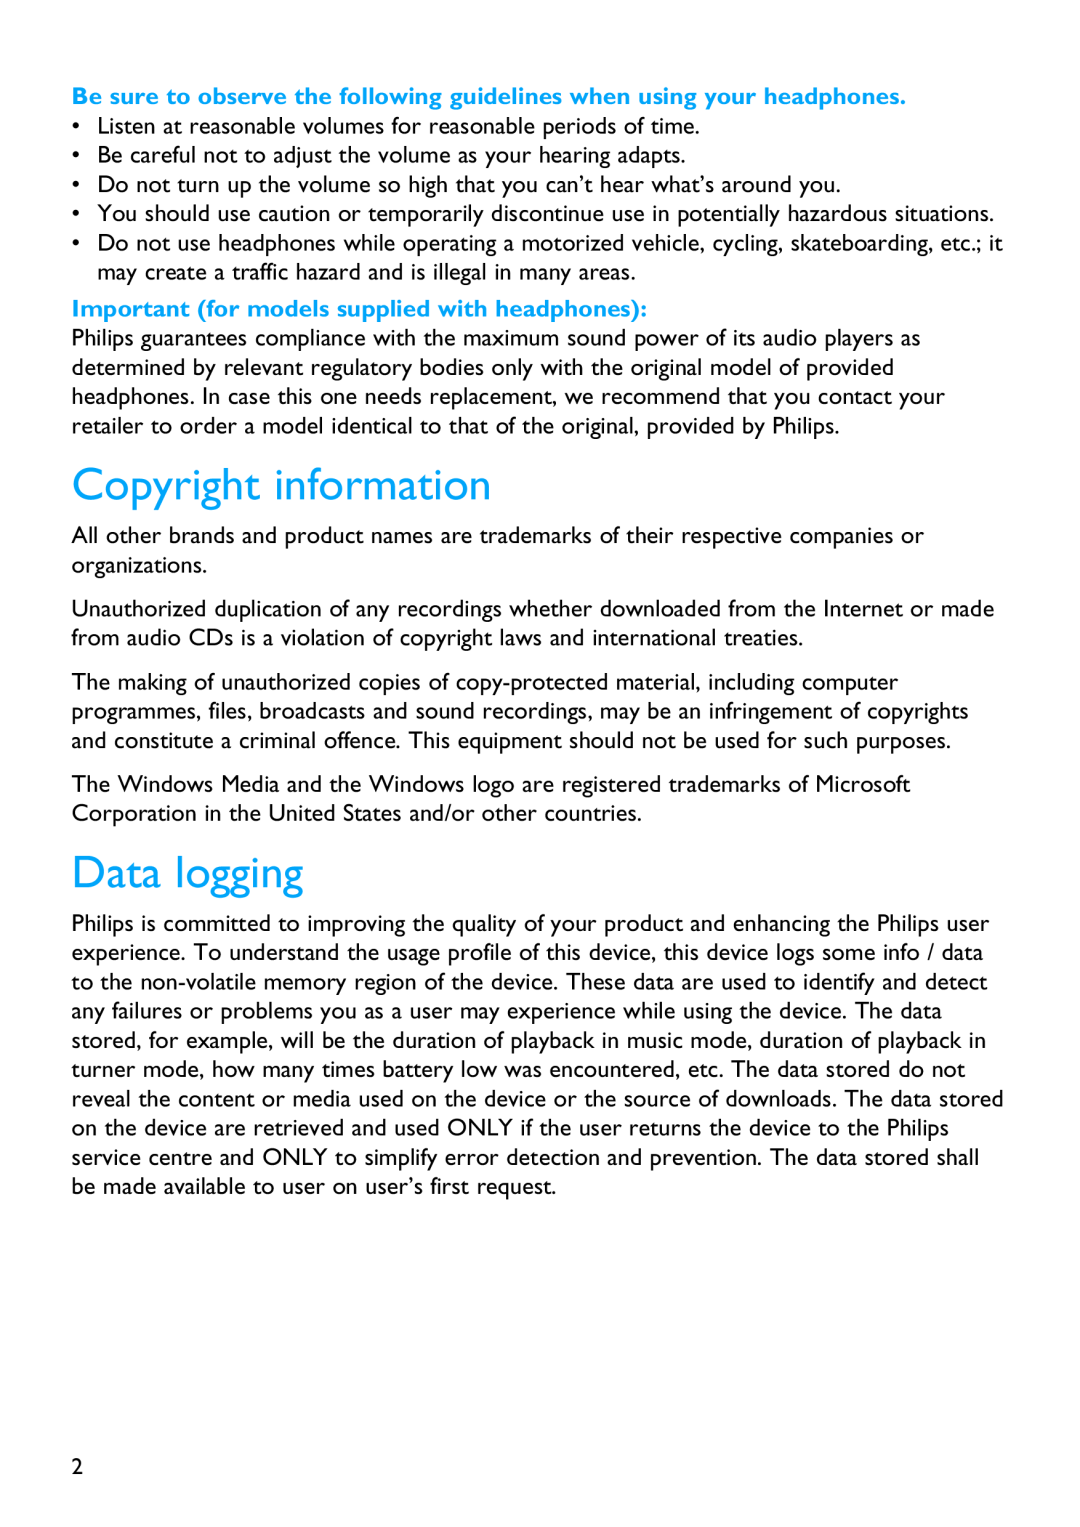 Philips SA2610 manual Copyright information, Data logging, Important for models supplied with headphones 